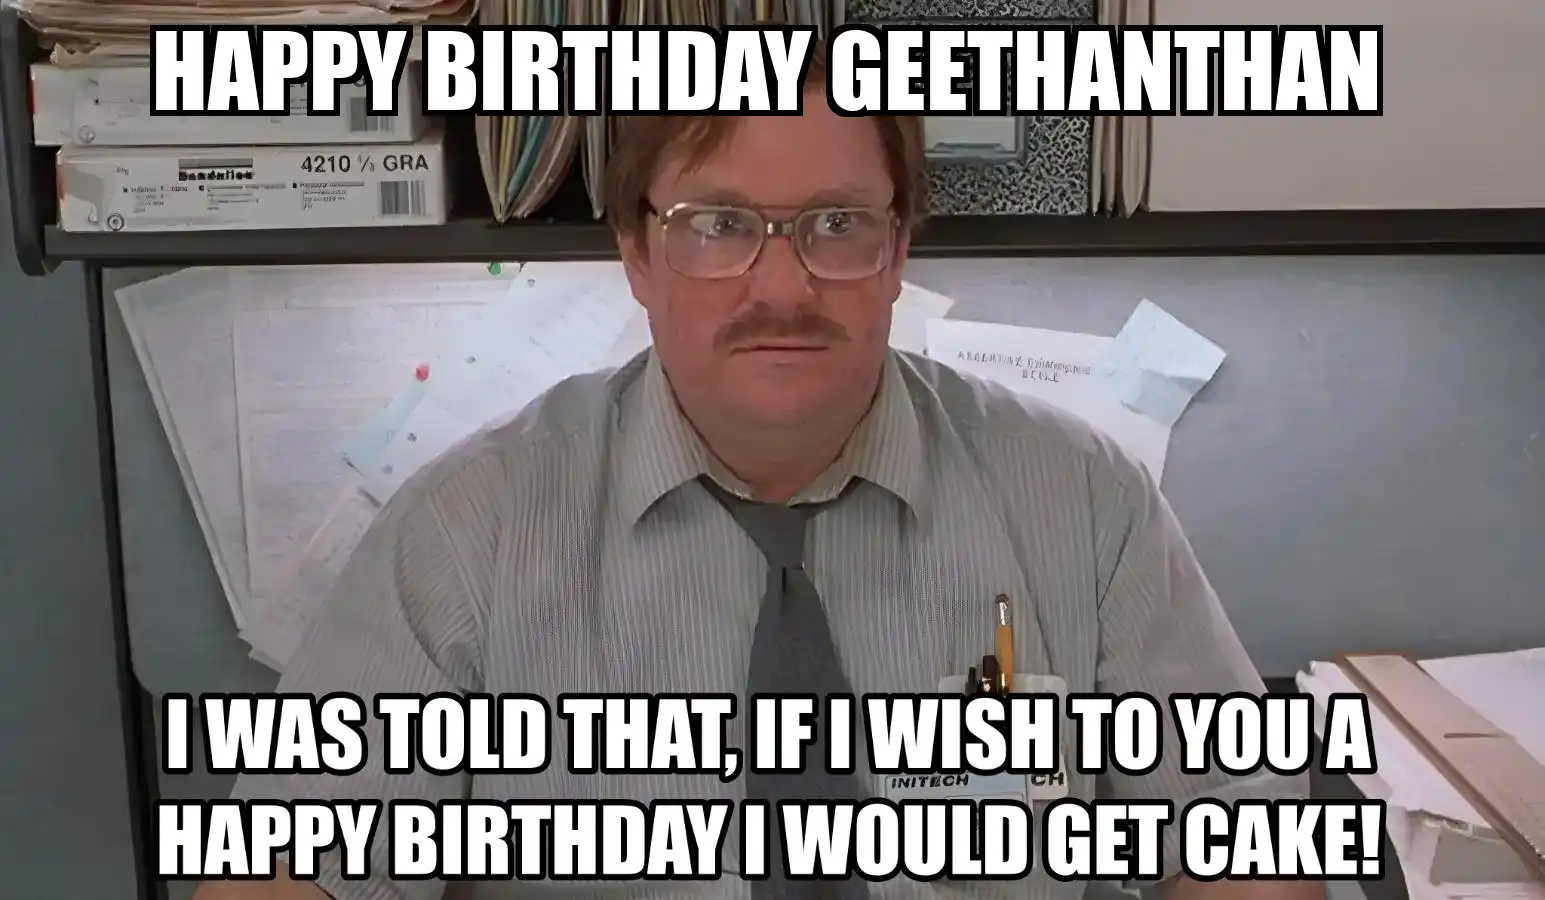 Happy Birthday Geethanthan I Would Get A Cake Meme